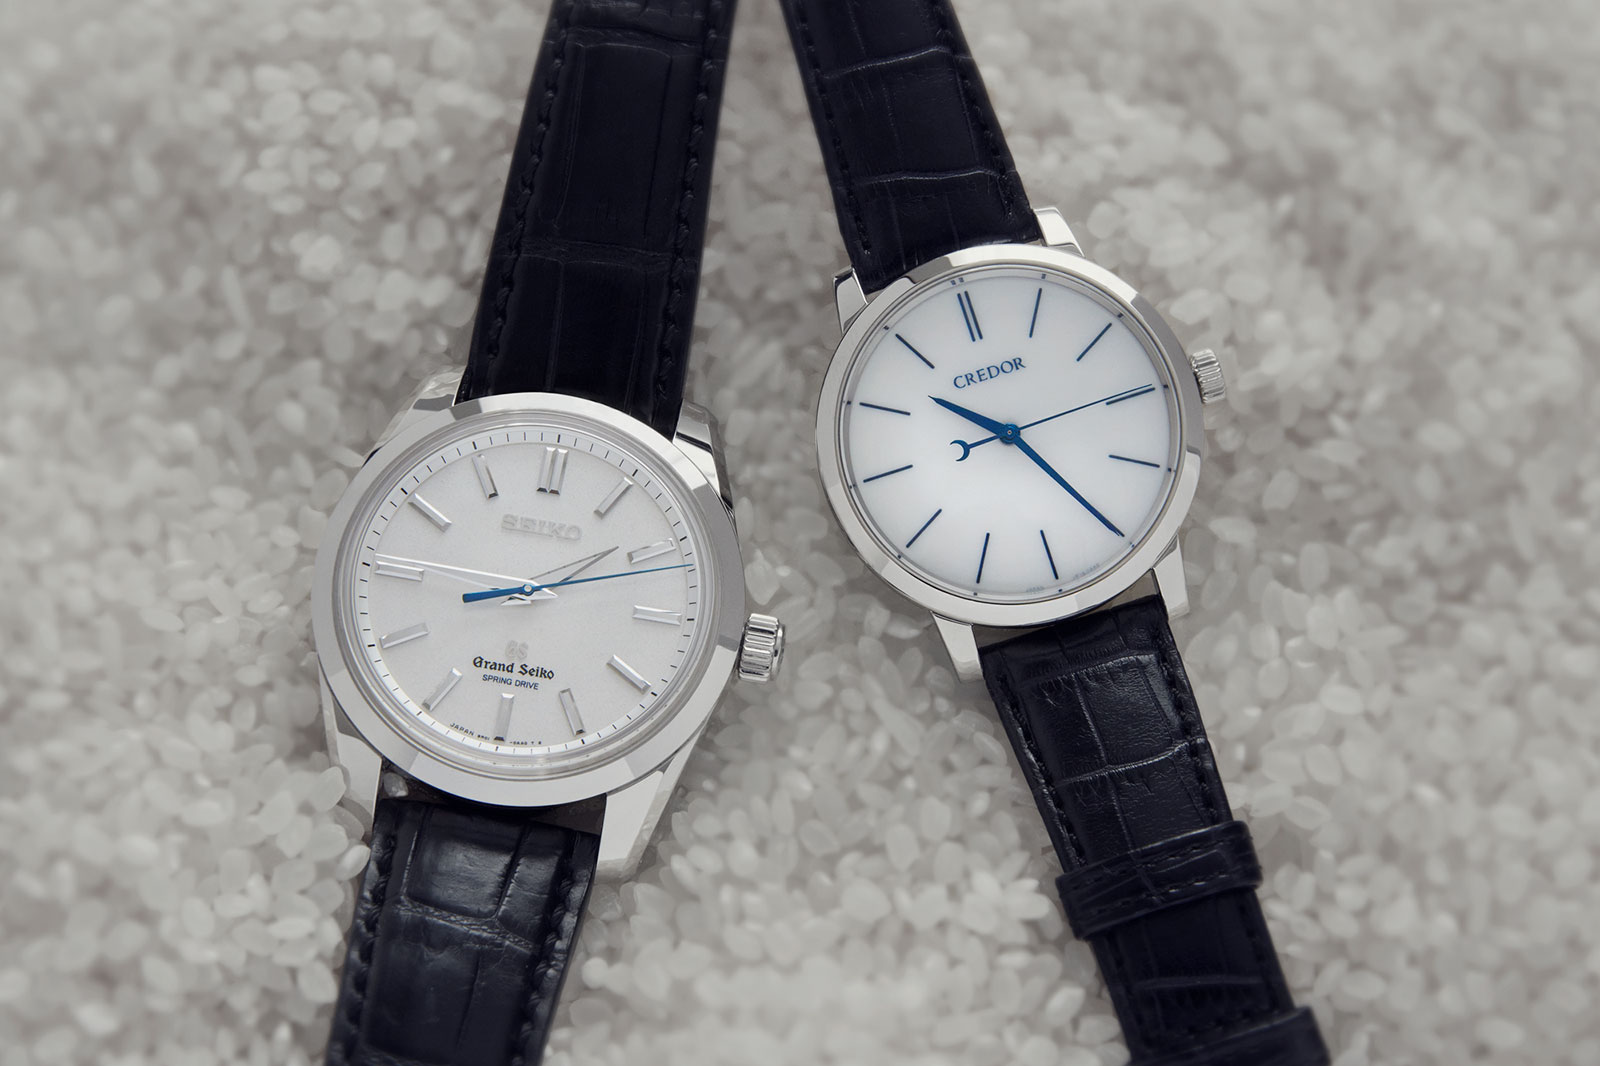 Comparing the Best of Japanese Watchmaking – Grand Seiko 8 Day and Credor  Eichi II | SJX Watches